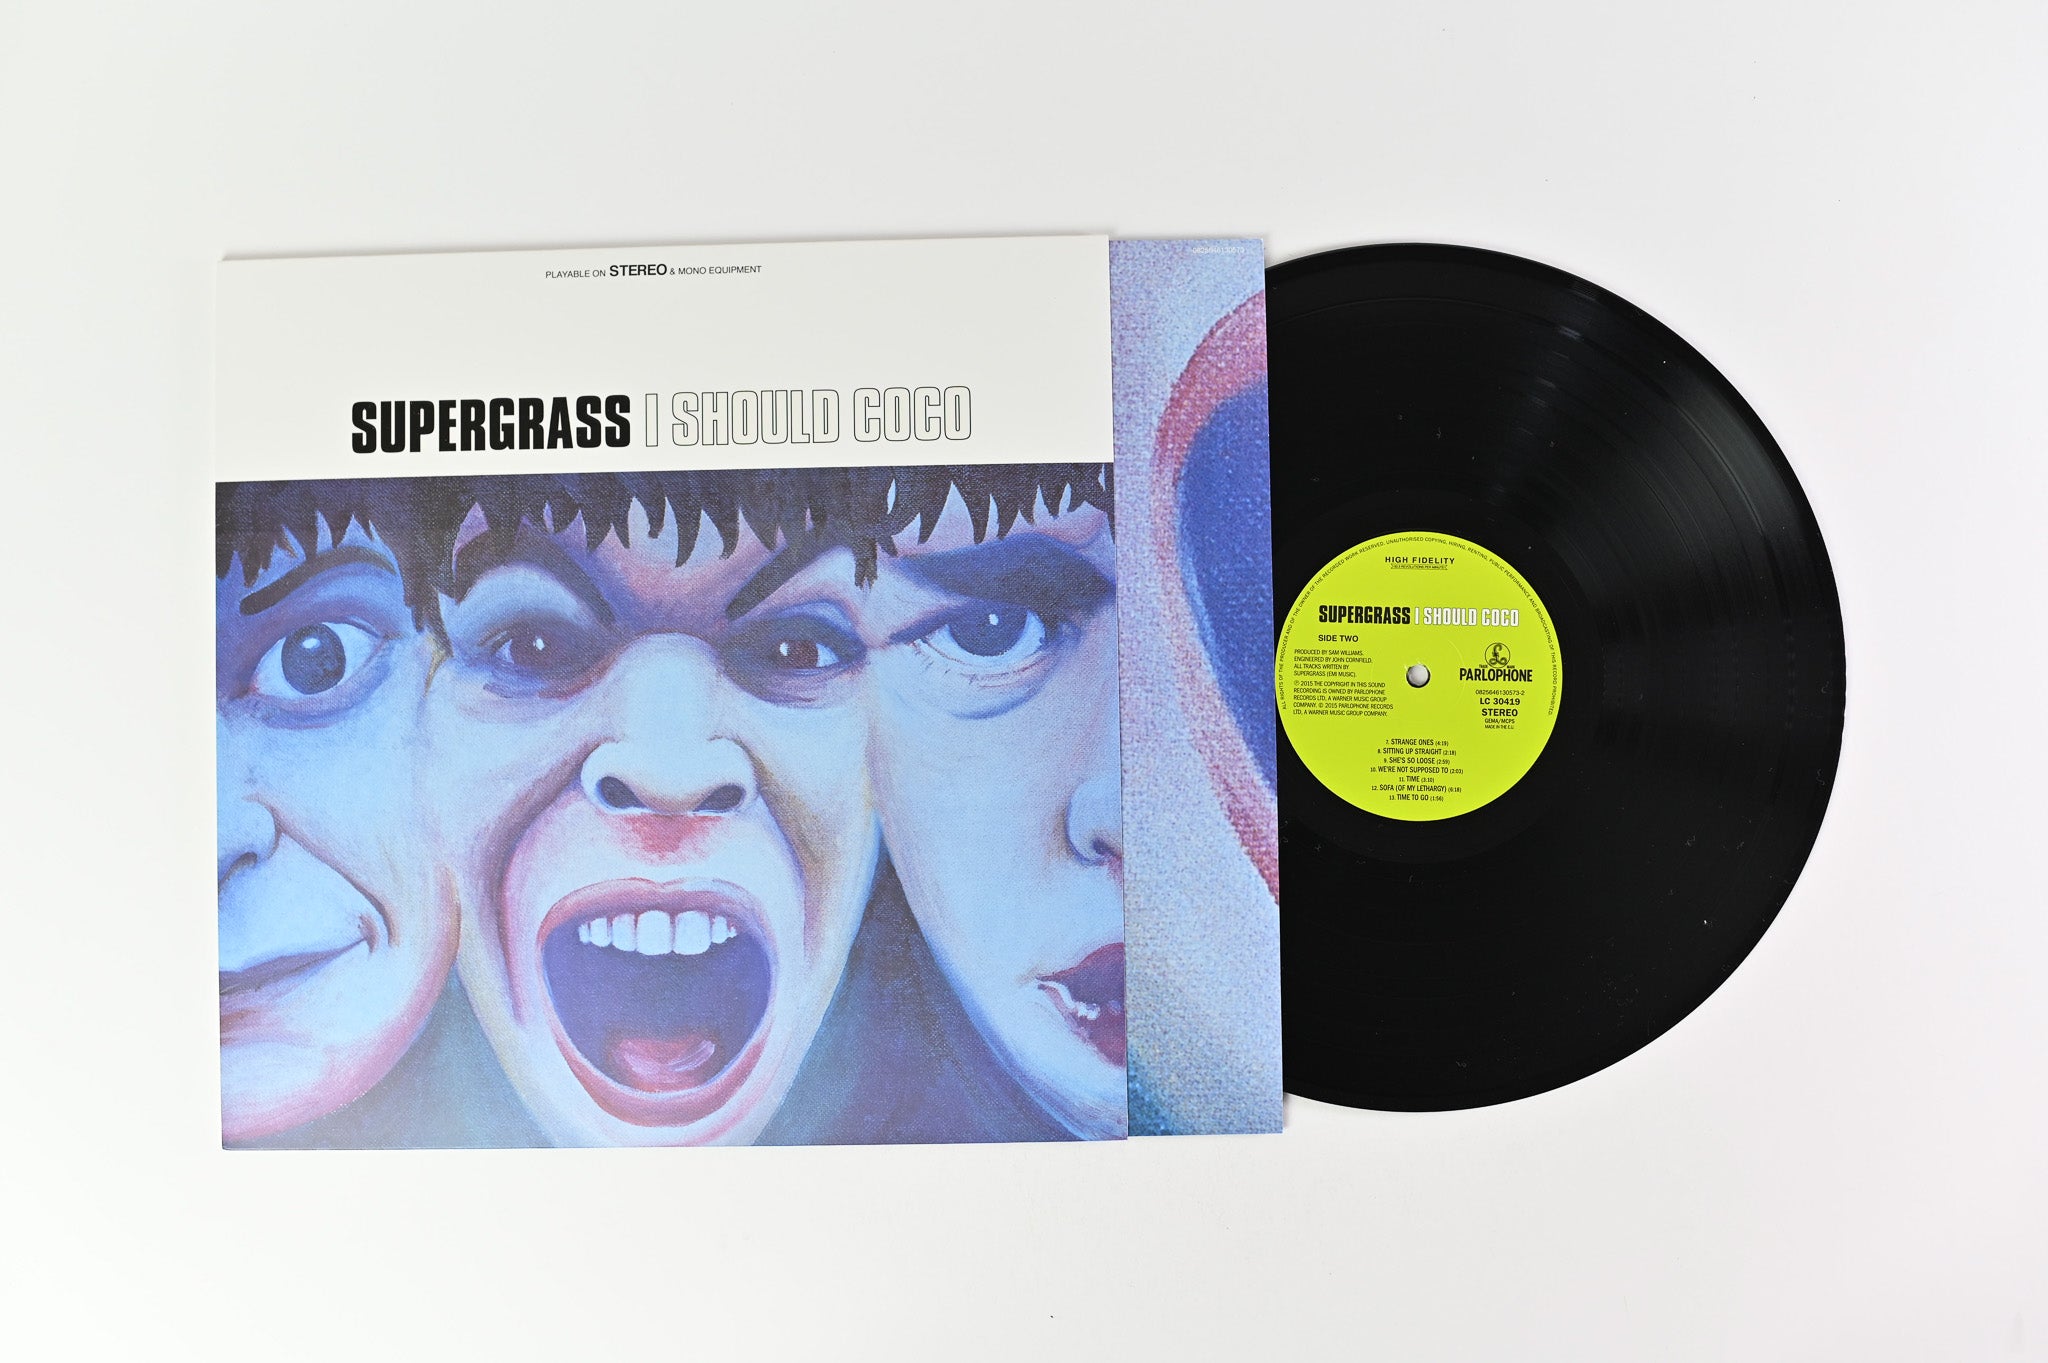 Supergrass - I Should Coco on Parlophone Ltd Edition Reissue With 7